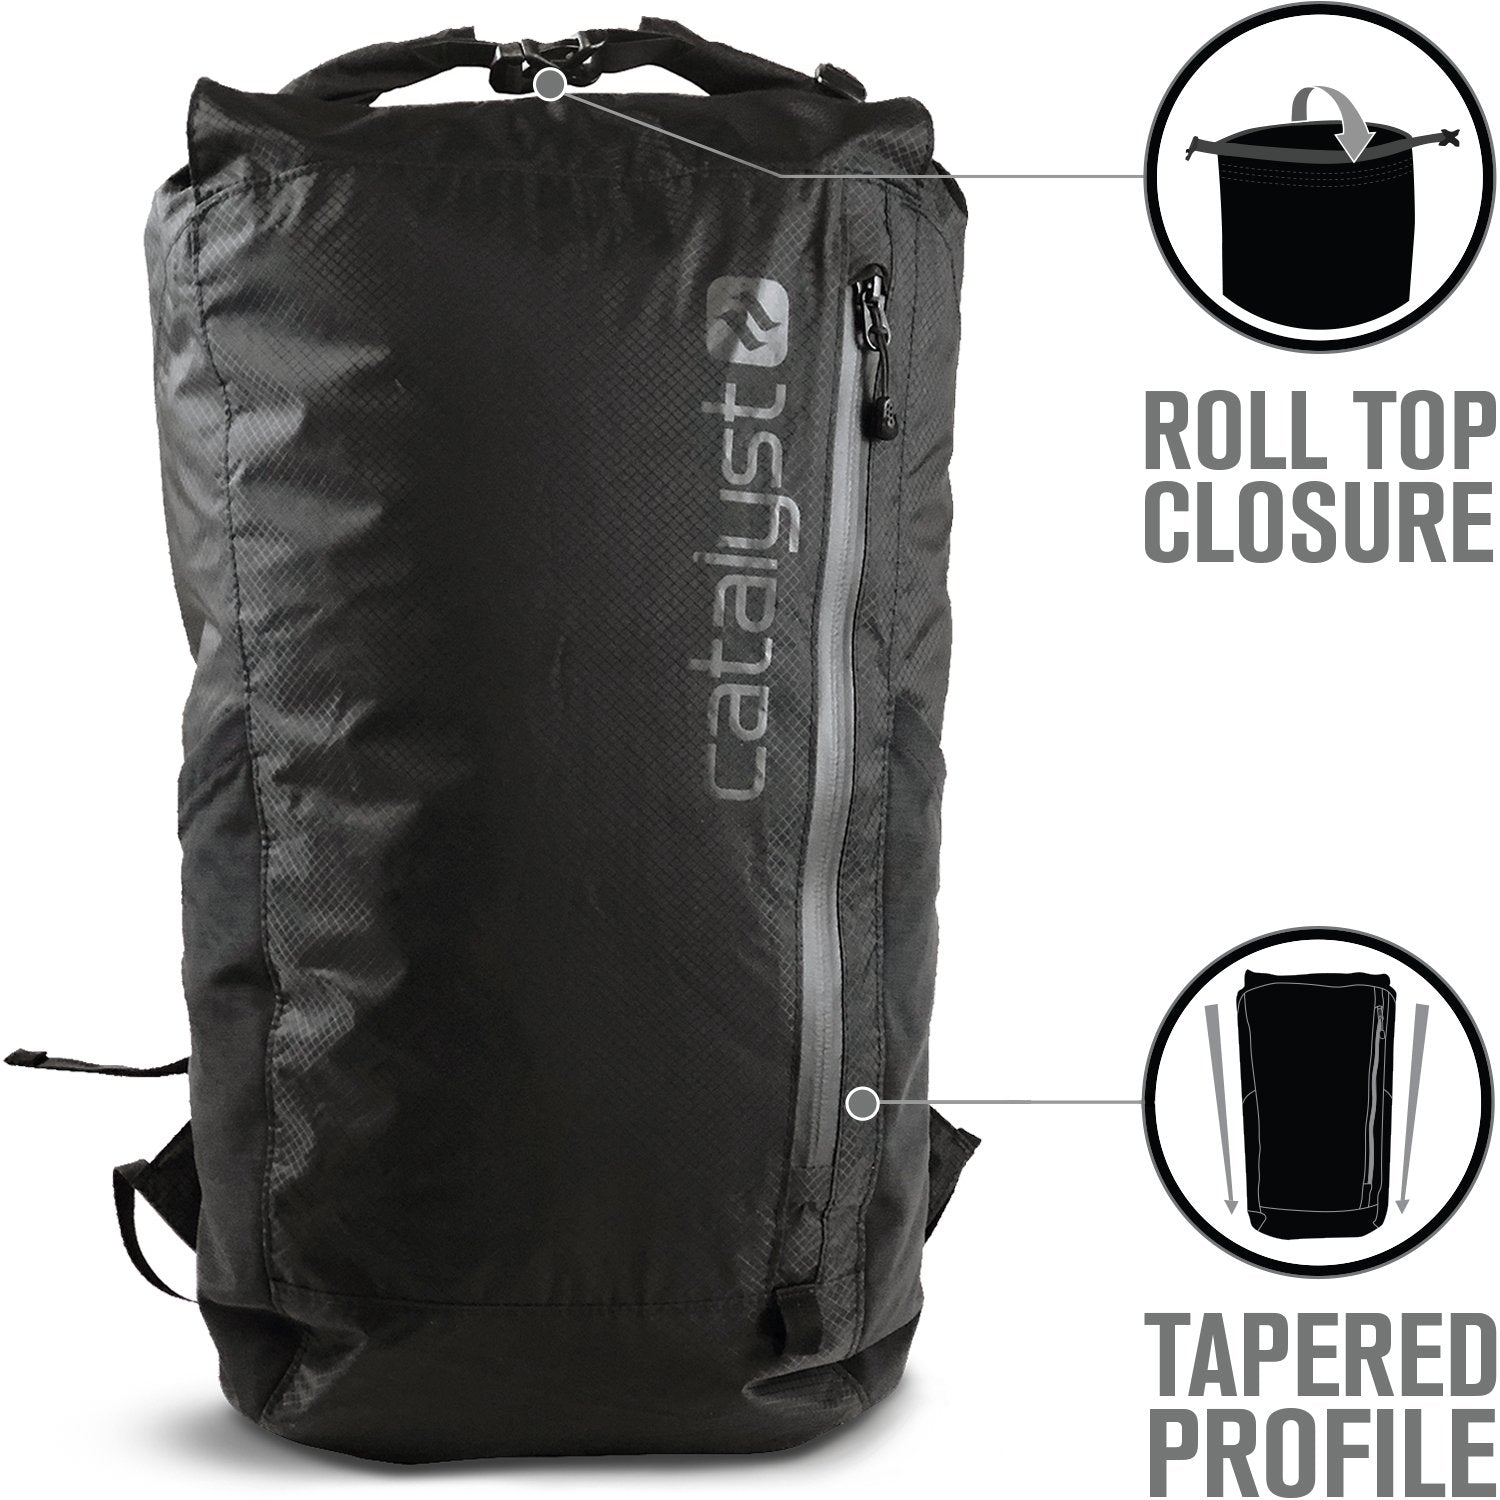 catalyst waterproof 20l backpack front view text reads roll top closure tapered profile